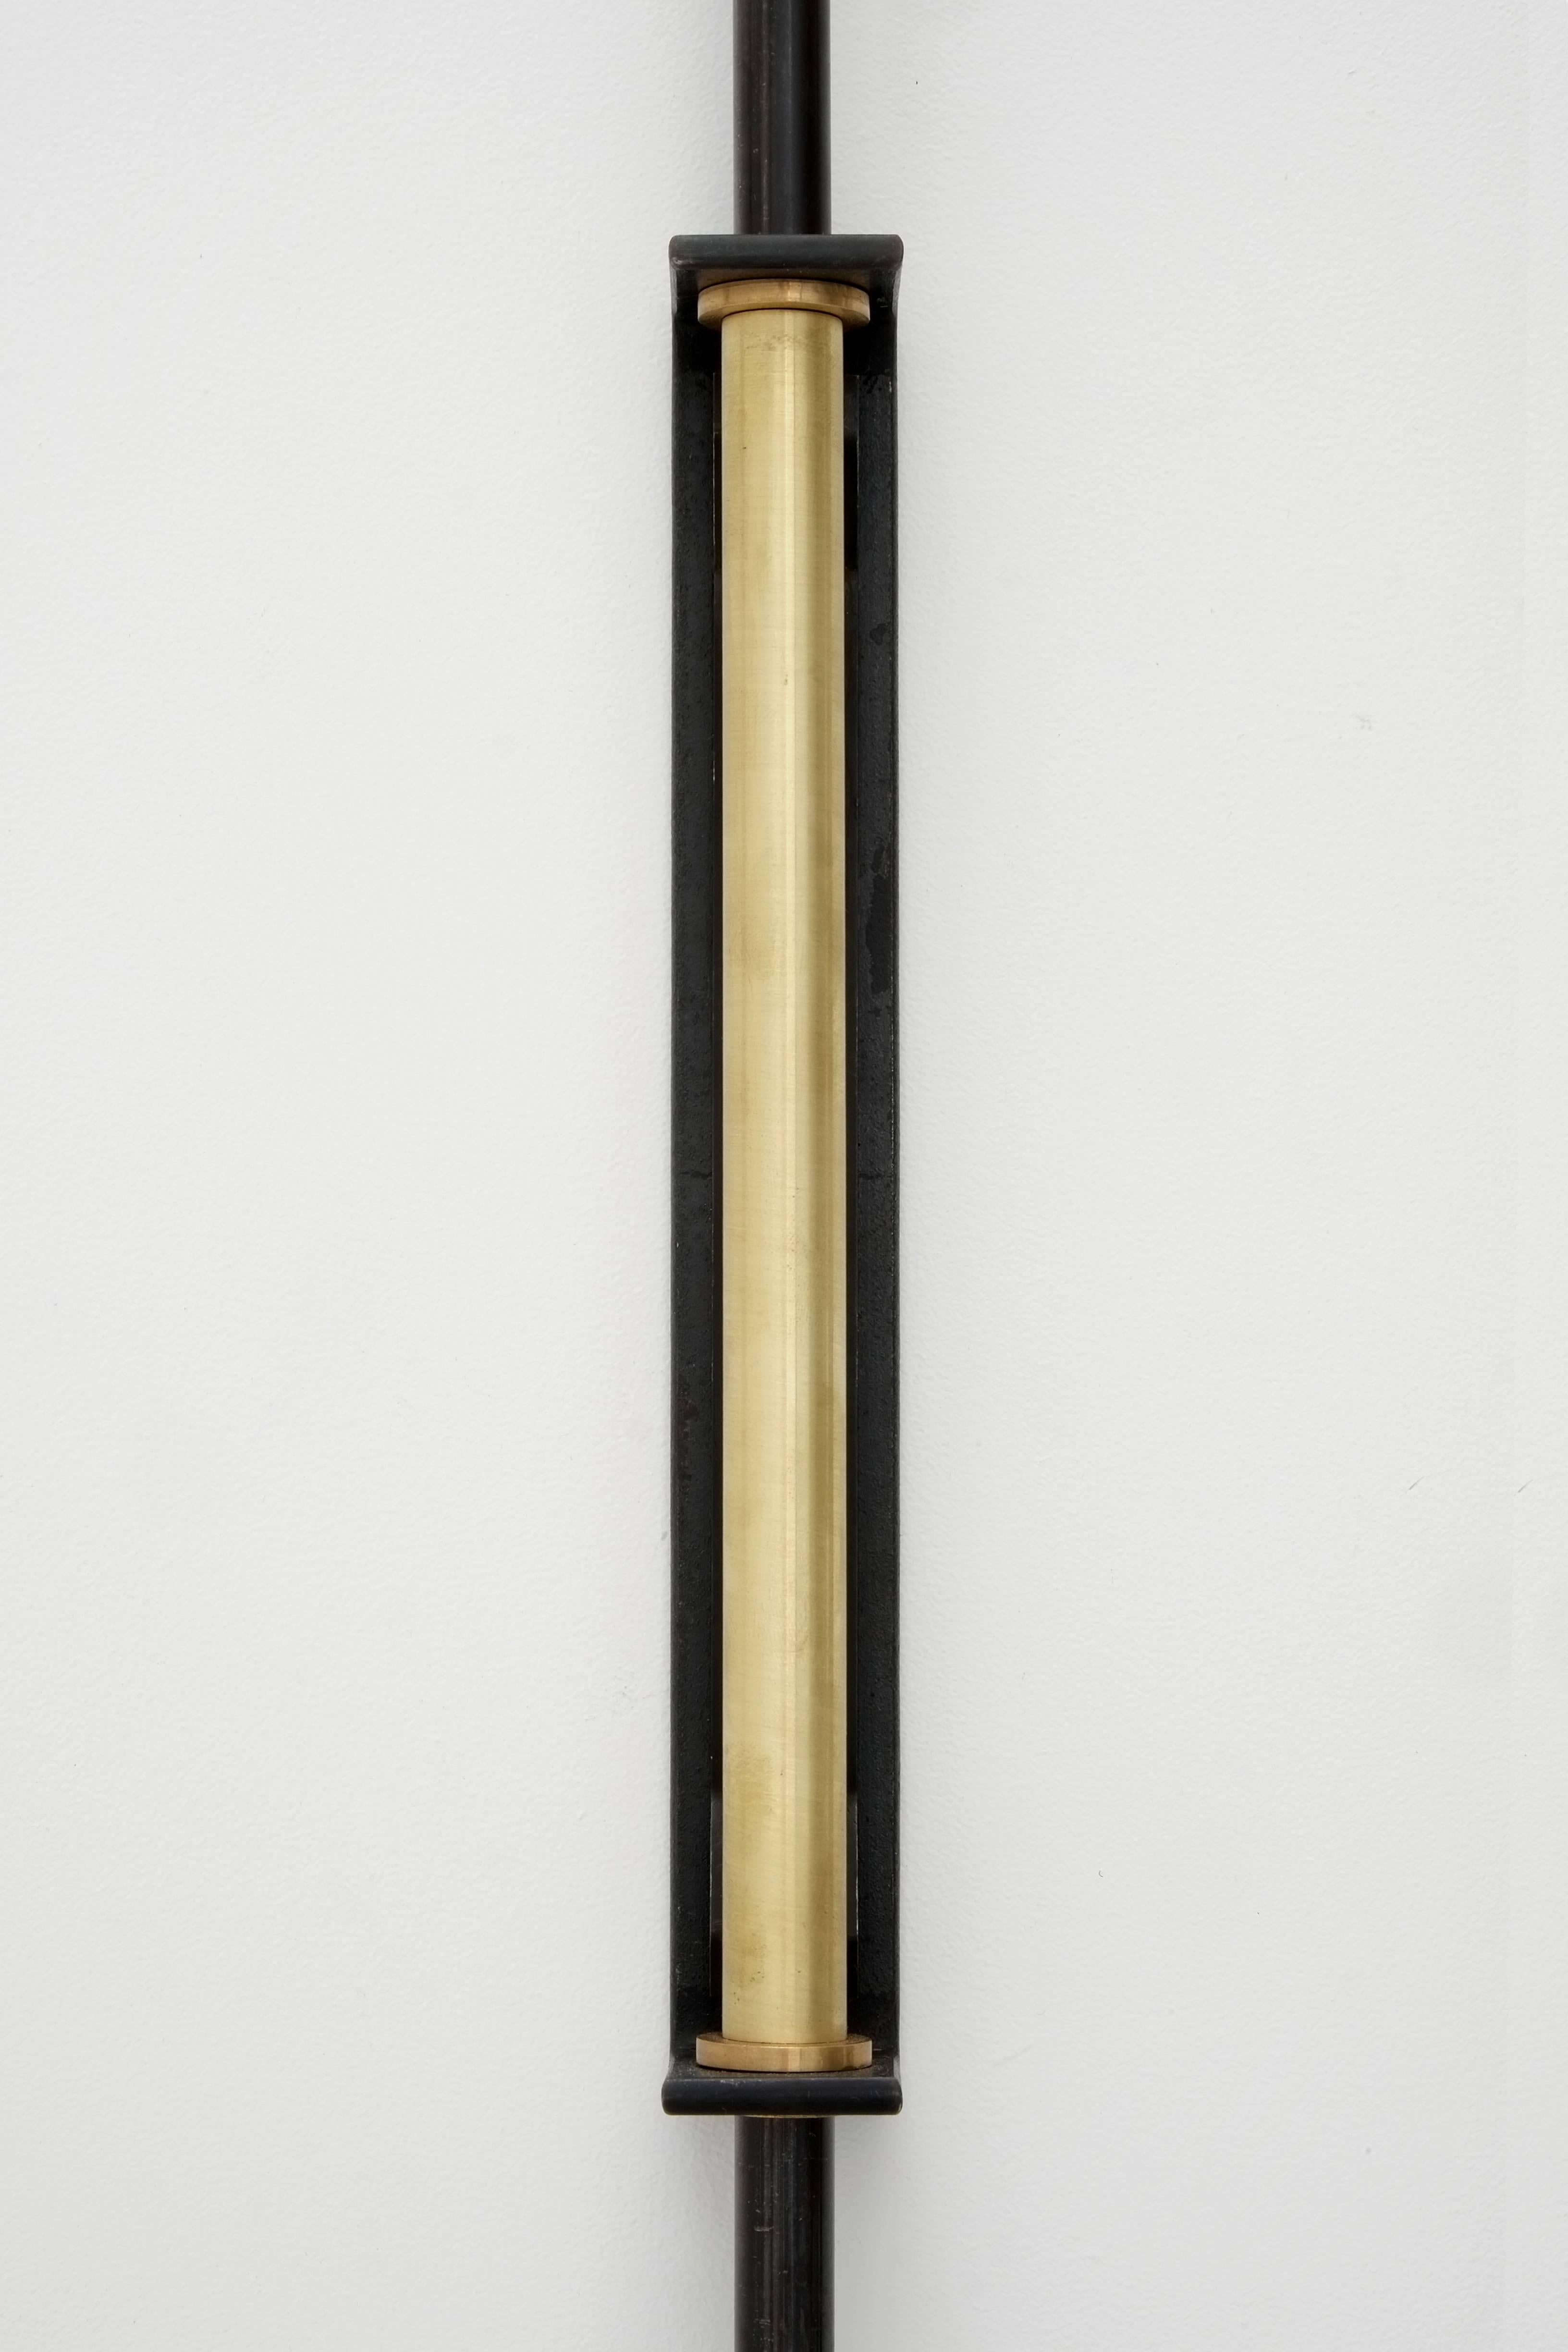 Brass Contemporary Wall Light or Sconce, Burnished Indigo Series, by JAMESPLUMB, 2014 For Sale